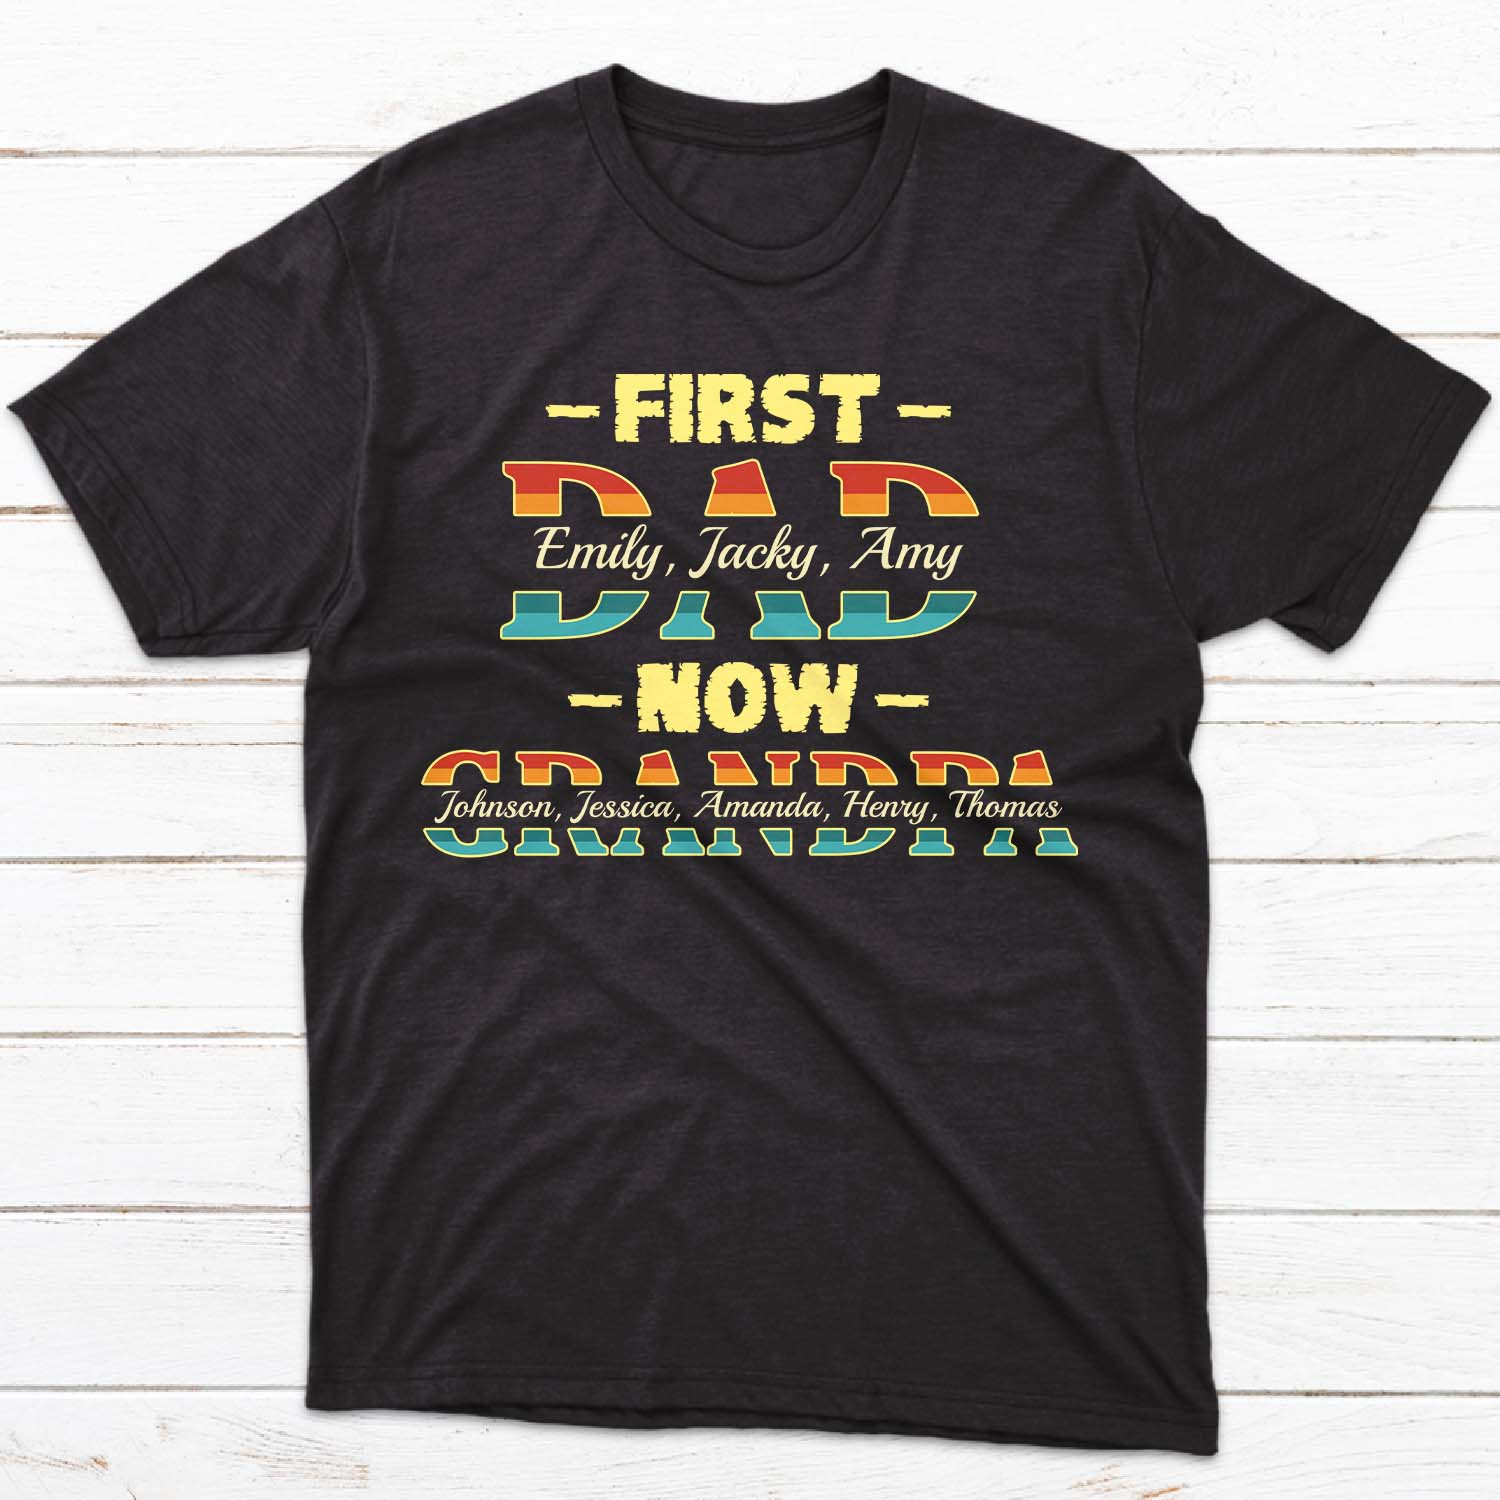 First Dad, Now Grandpa Personalized Shirt